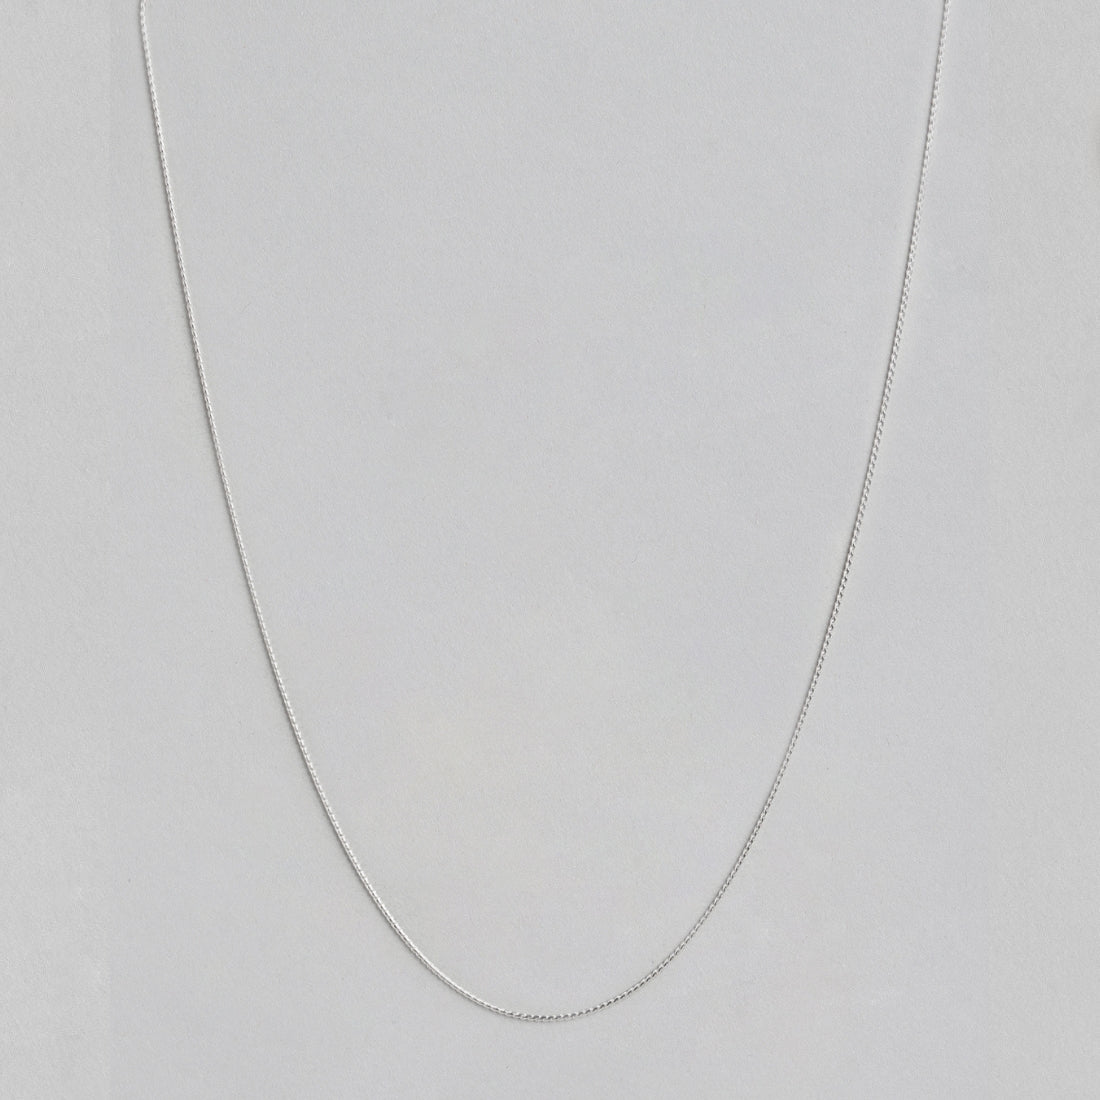 Minimal Rhodium Plated 925 Sterling Silver Rope Chain